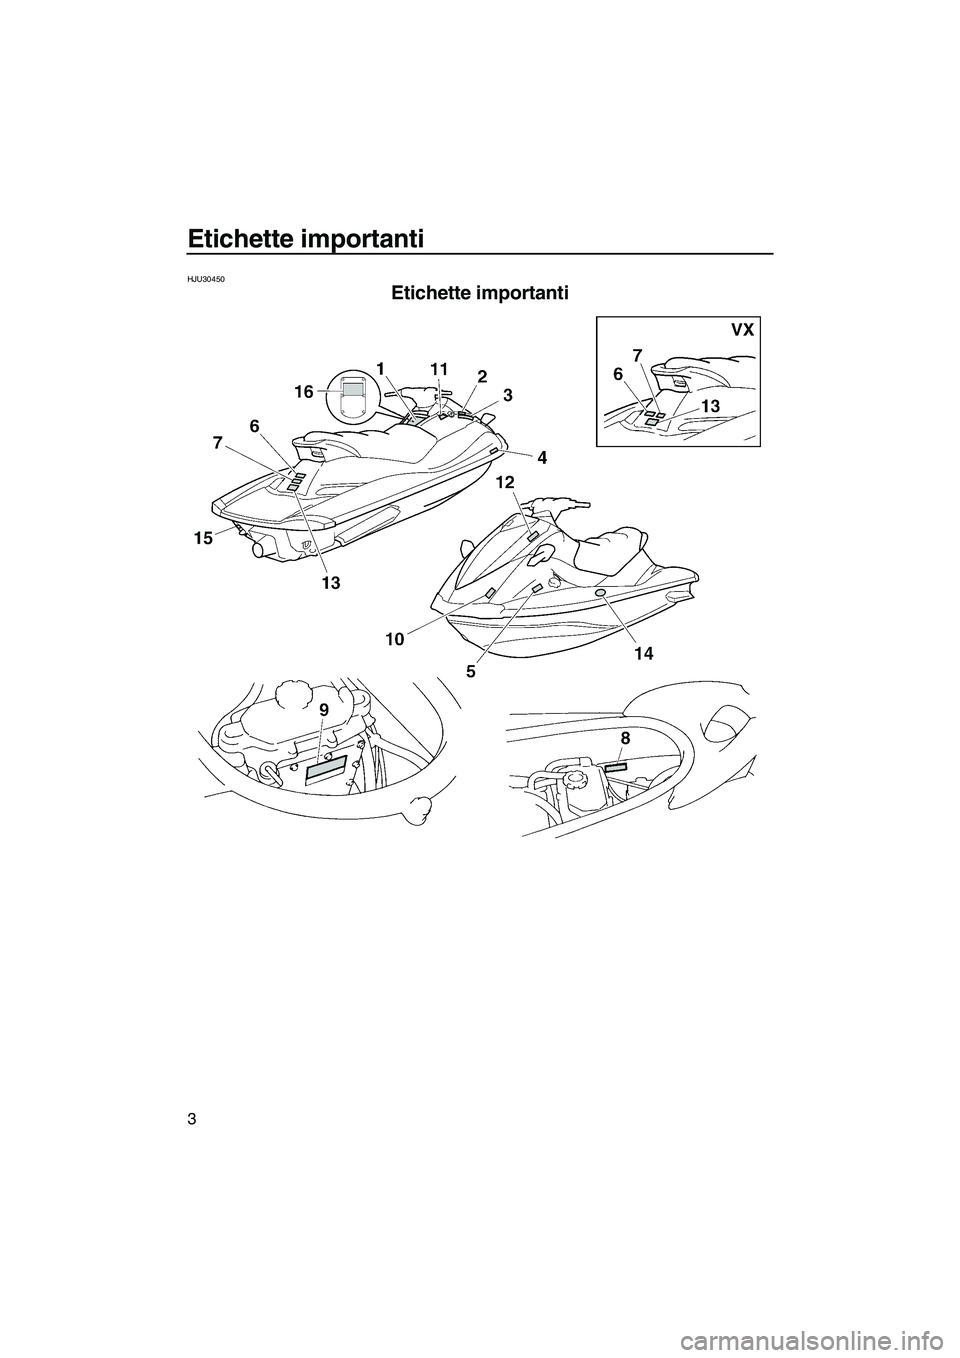 YAMAHA VX SPORT 2008  Manuale duso (in Italian) Etichette importanti
3
HJU30450
Etichette importanti 
UF1K73H0.book  Page 3  Tuesday, July 10, 2007  9:24 PM 